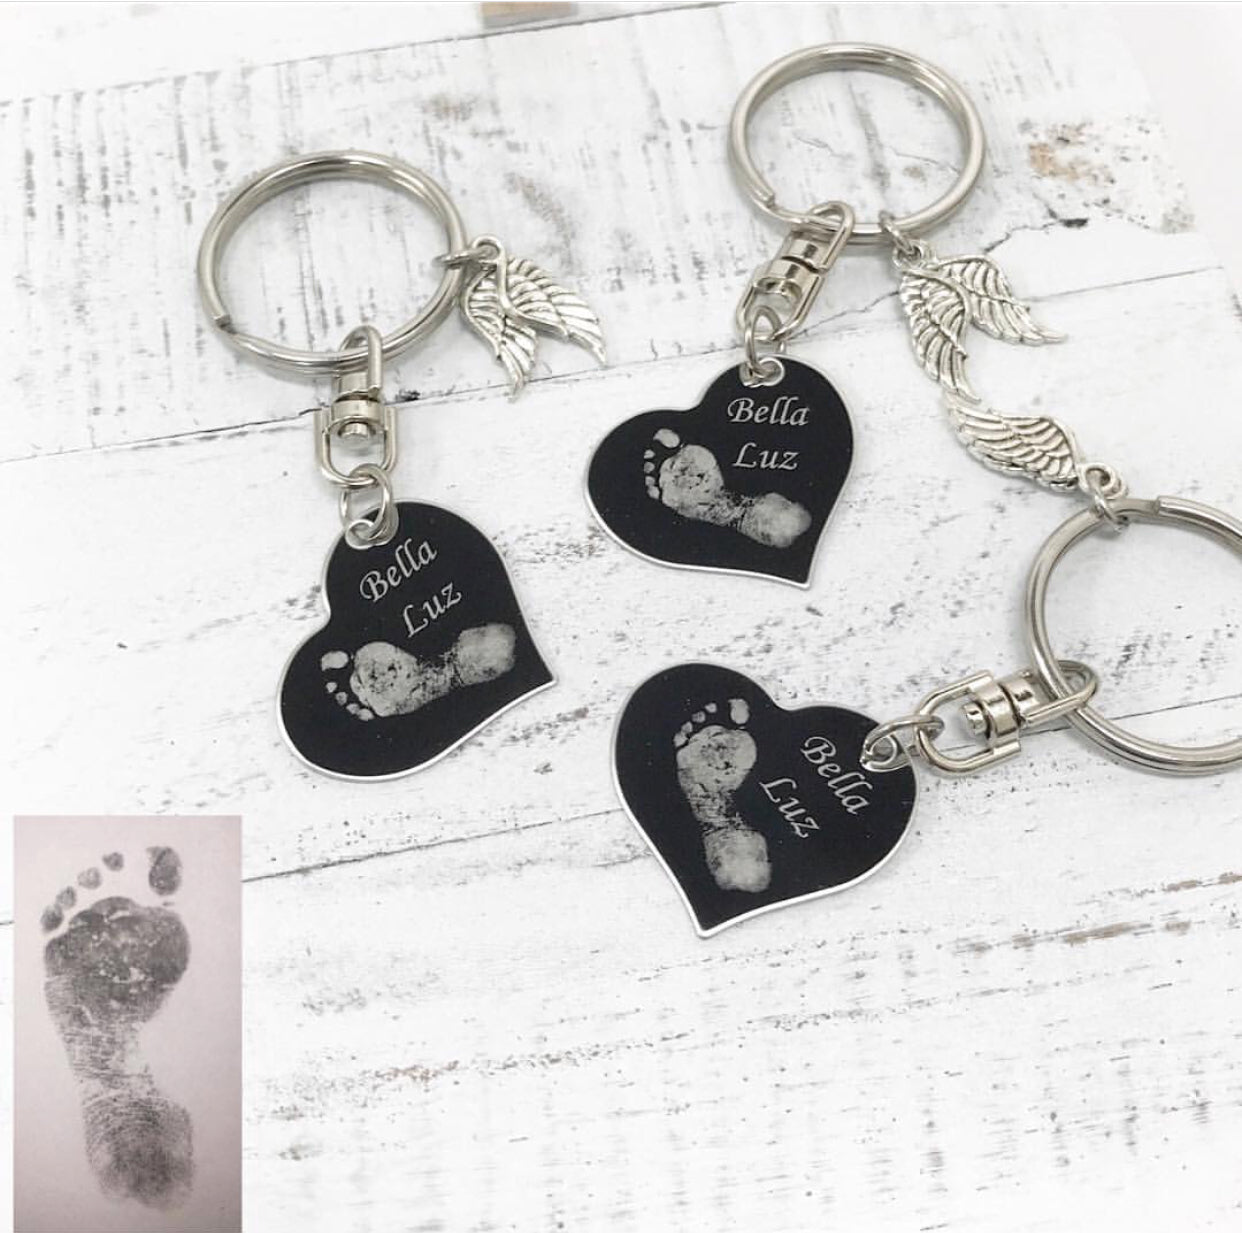 Photo Engraved Keychain - 3 Pack